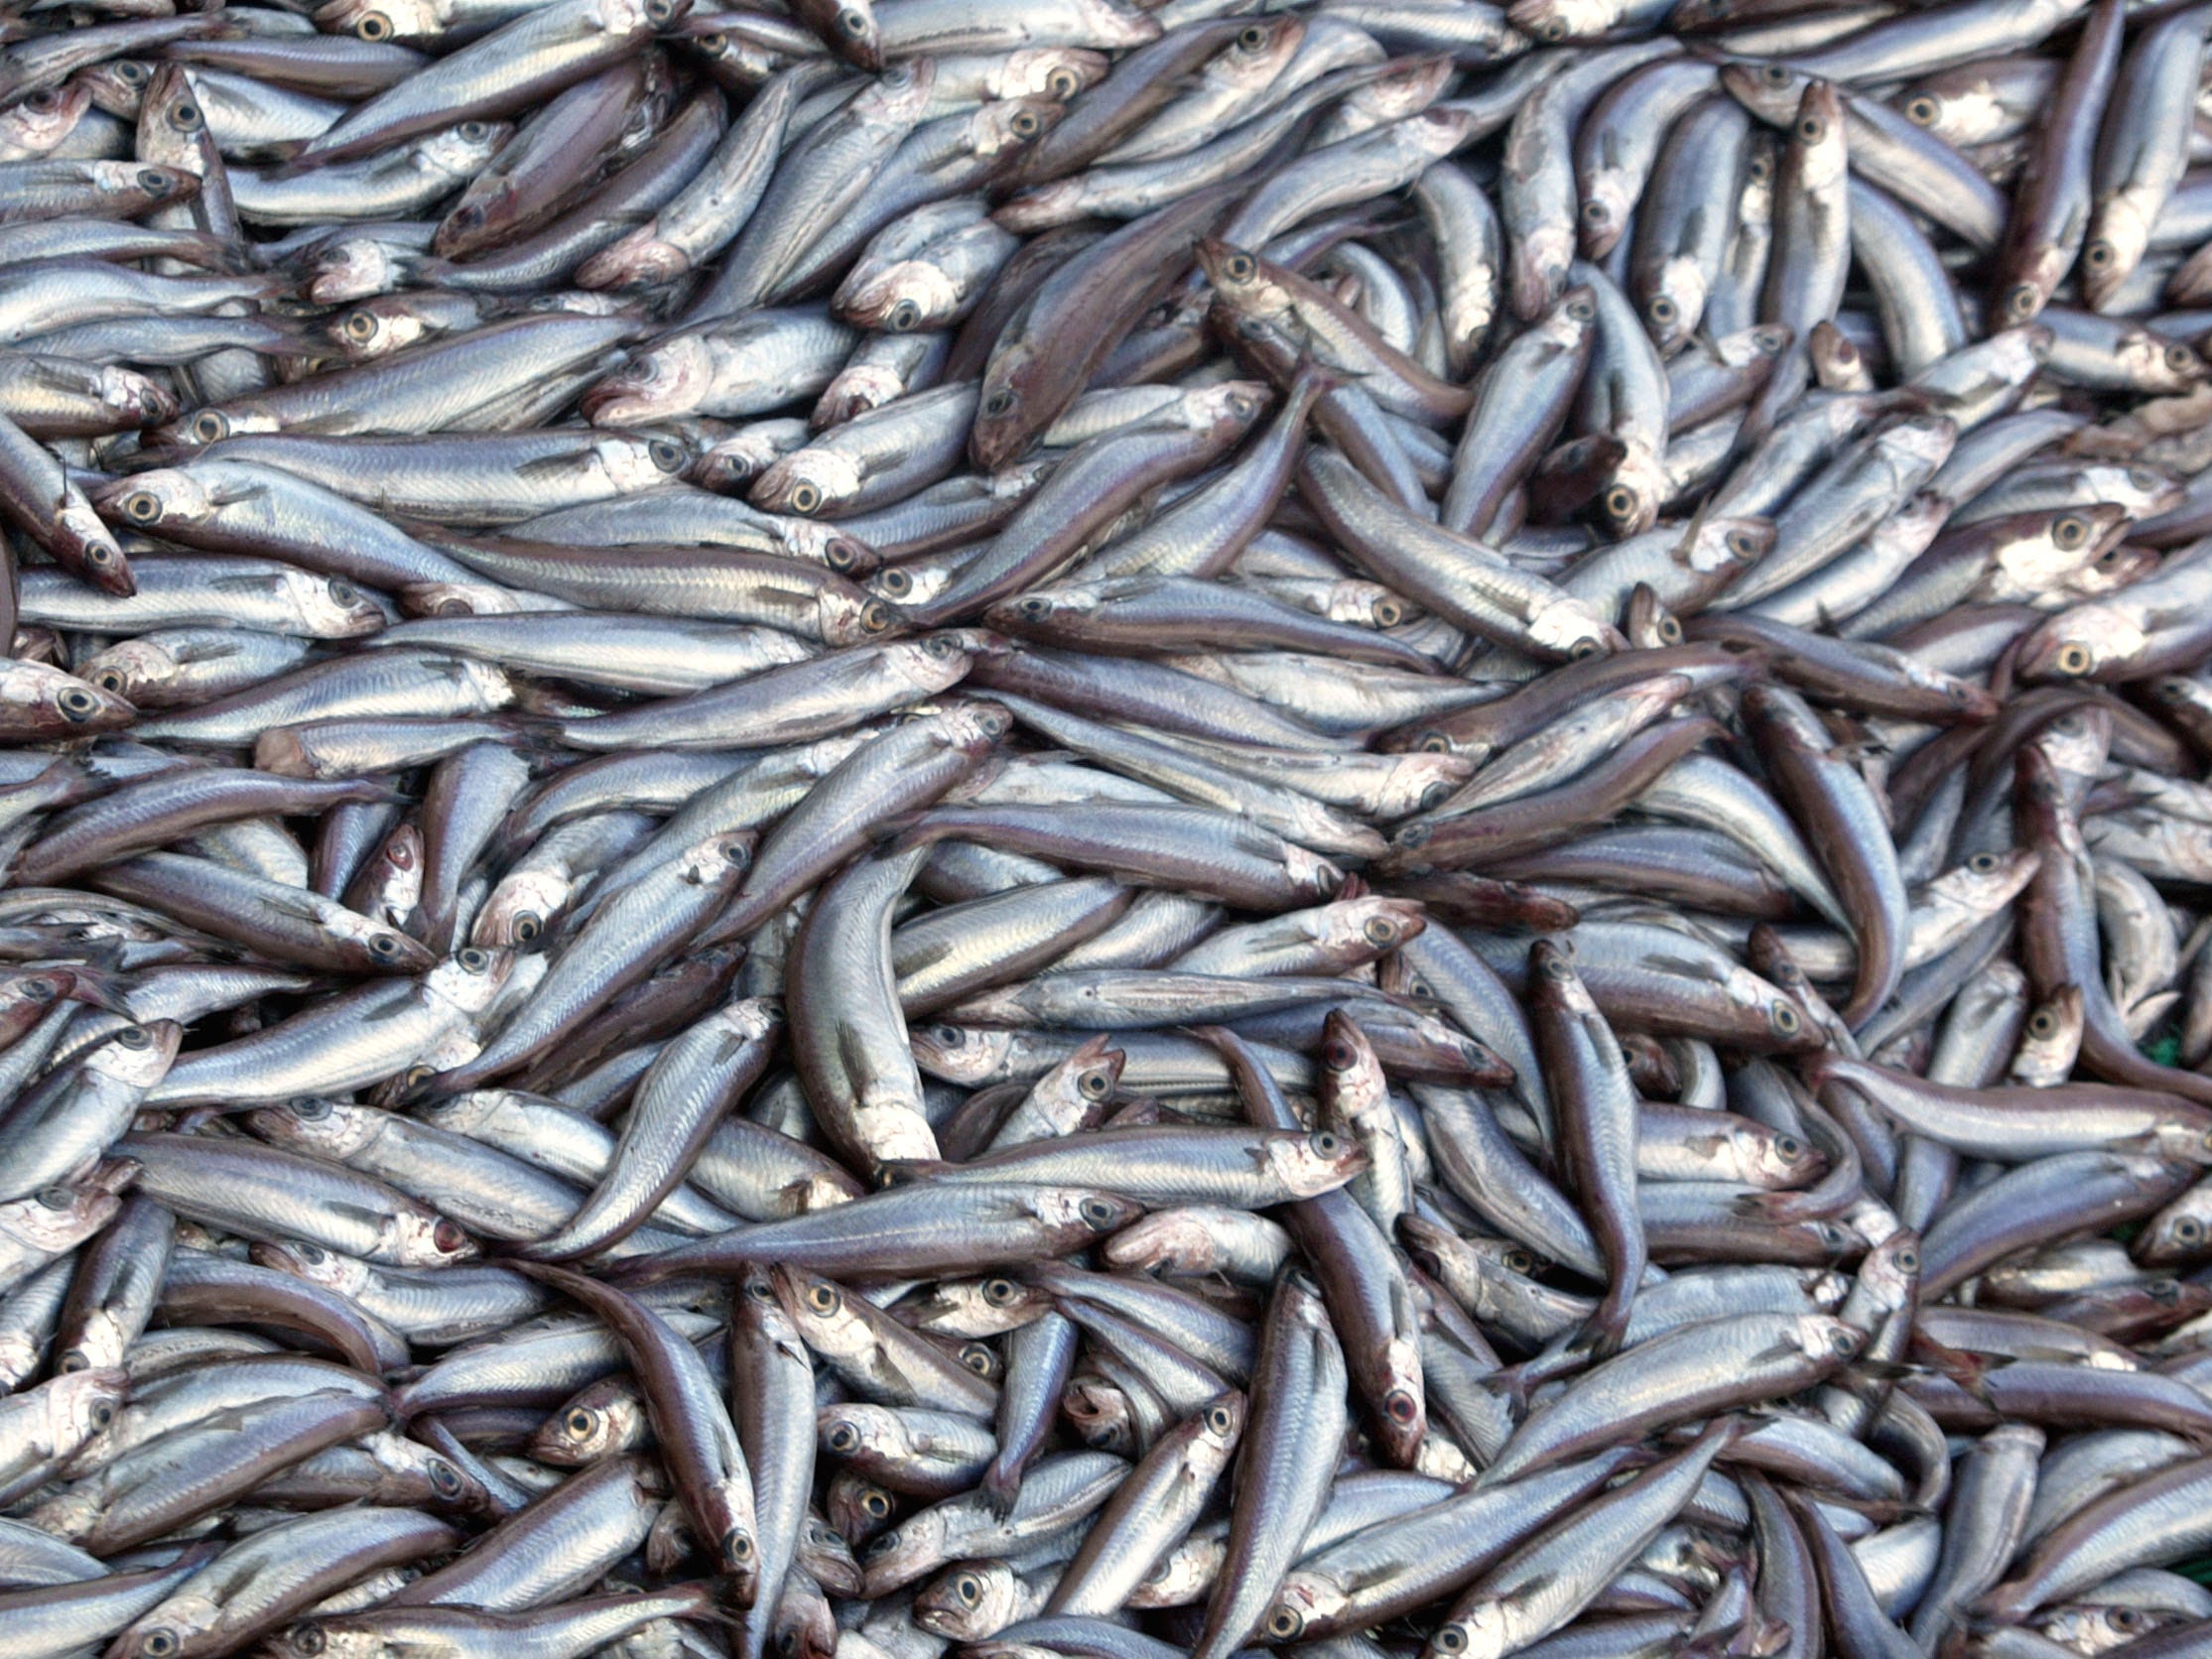 Blue whiting caught by an industrial trawler.